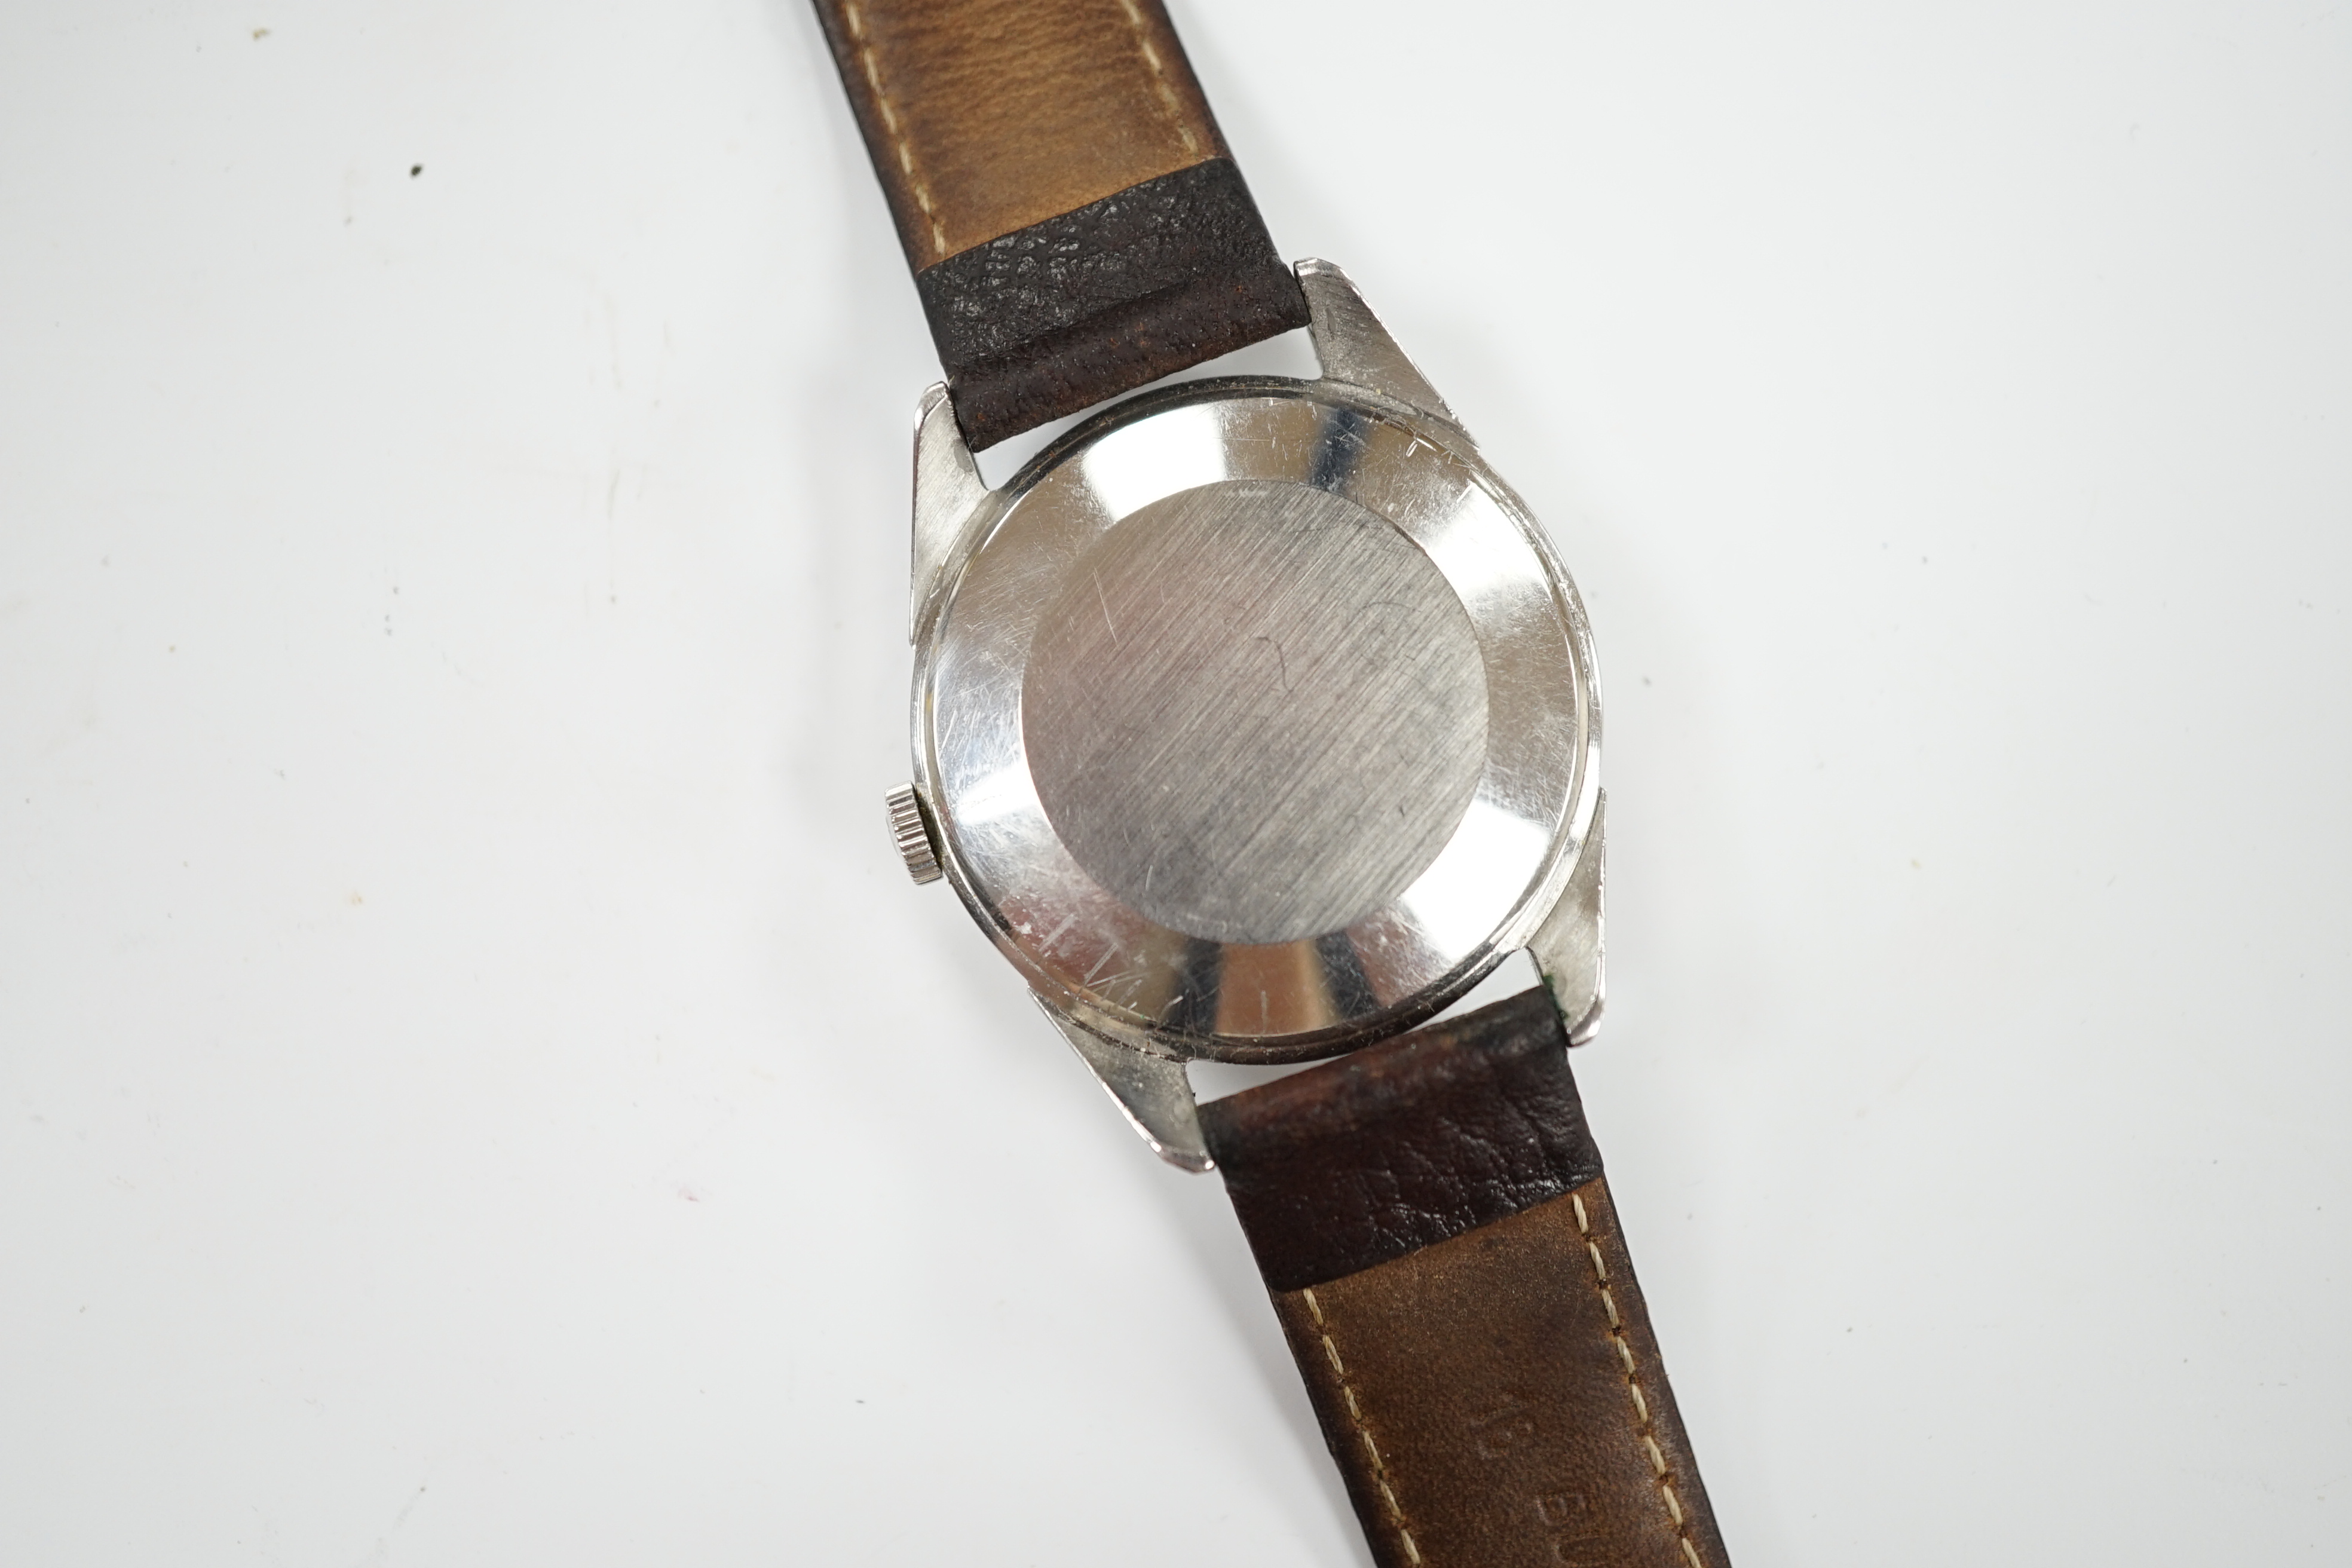 A gentleman's late 1950's stainless steel Omega manual wind wrist watch, with baton and Arabic numerals, movement c.284, on associated strap, case diameter 35mm.